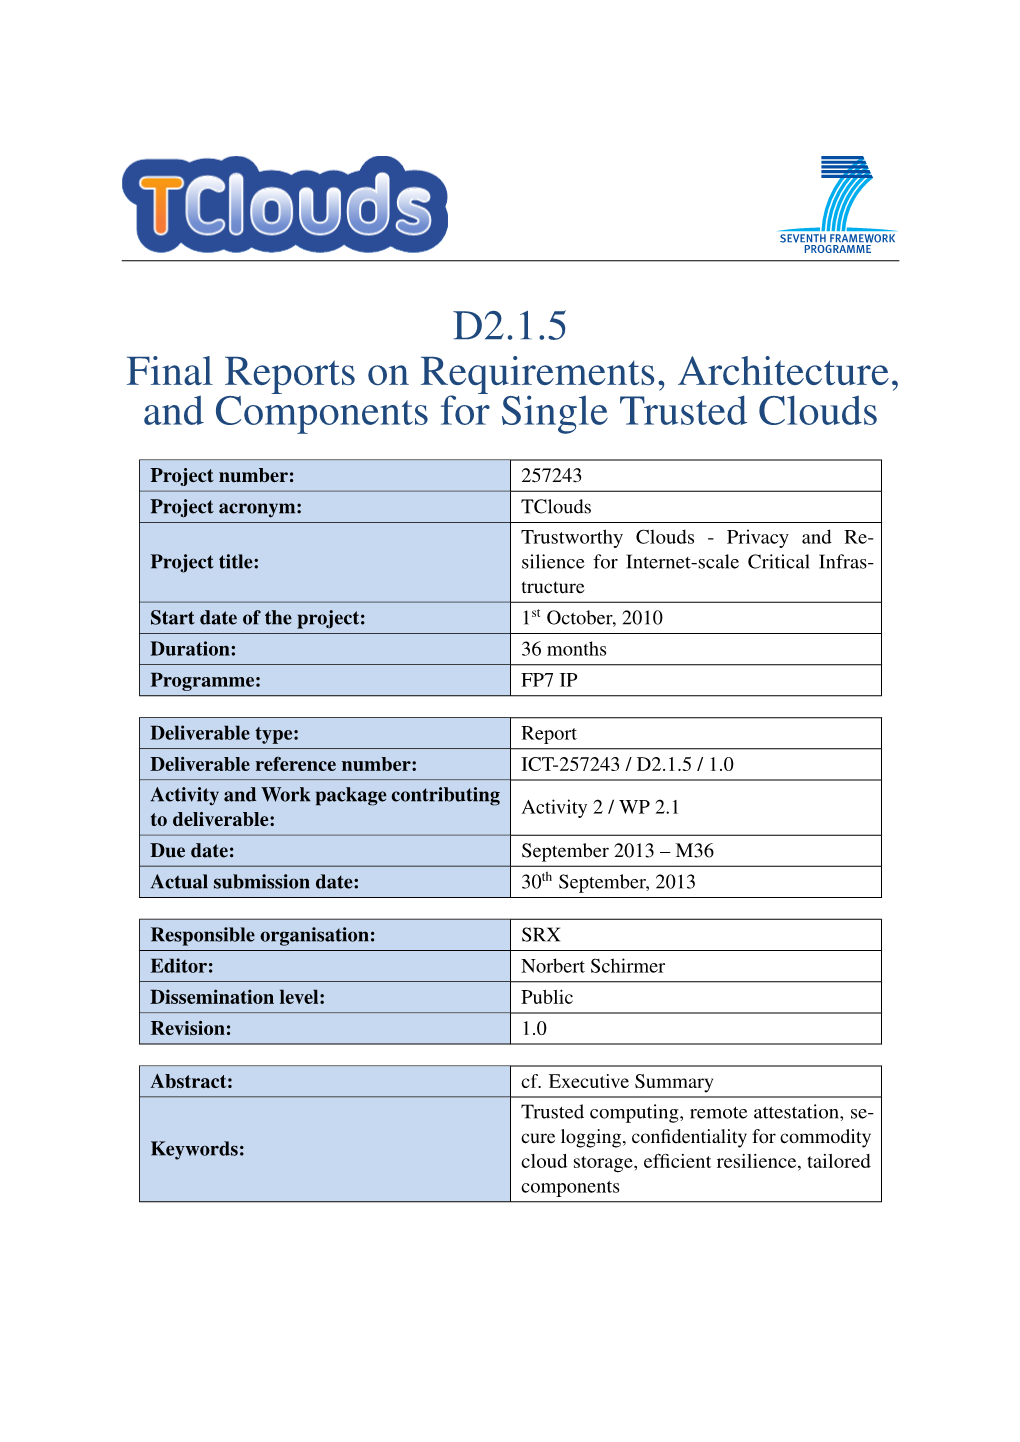 D2.1.5 Final Reports on Requirements, Architecture, and Components for Single Trusted Clouds